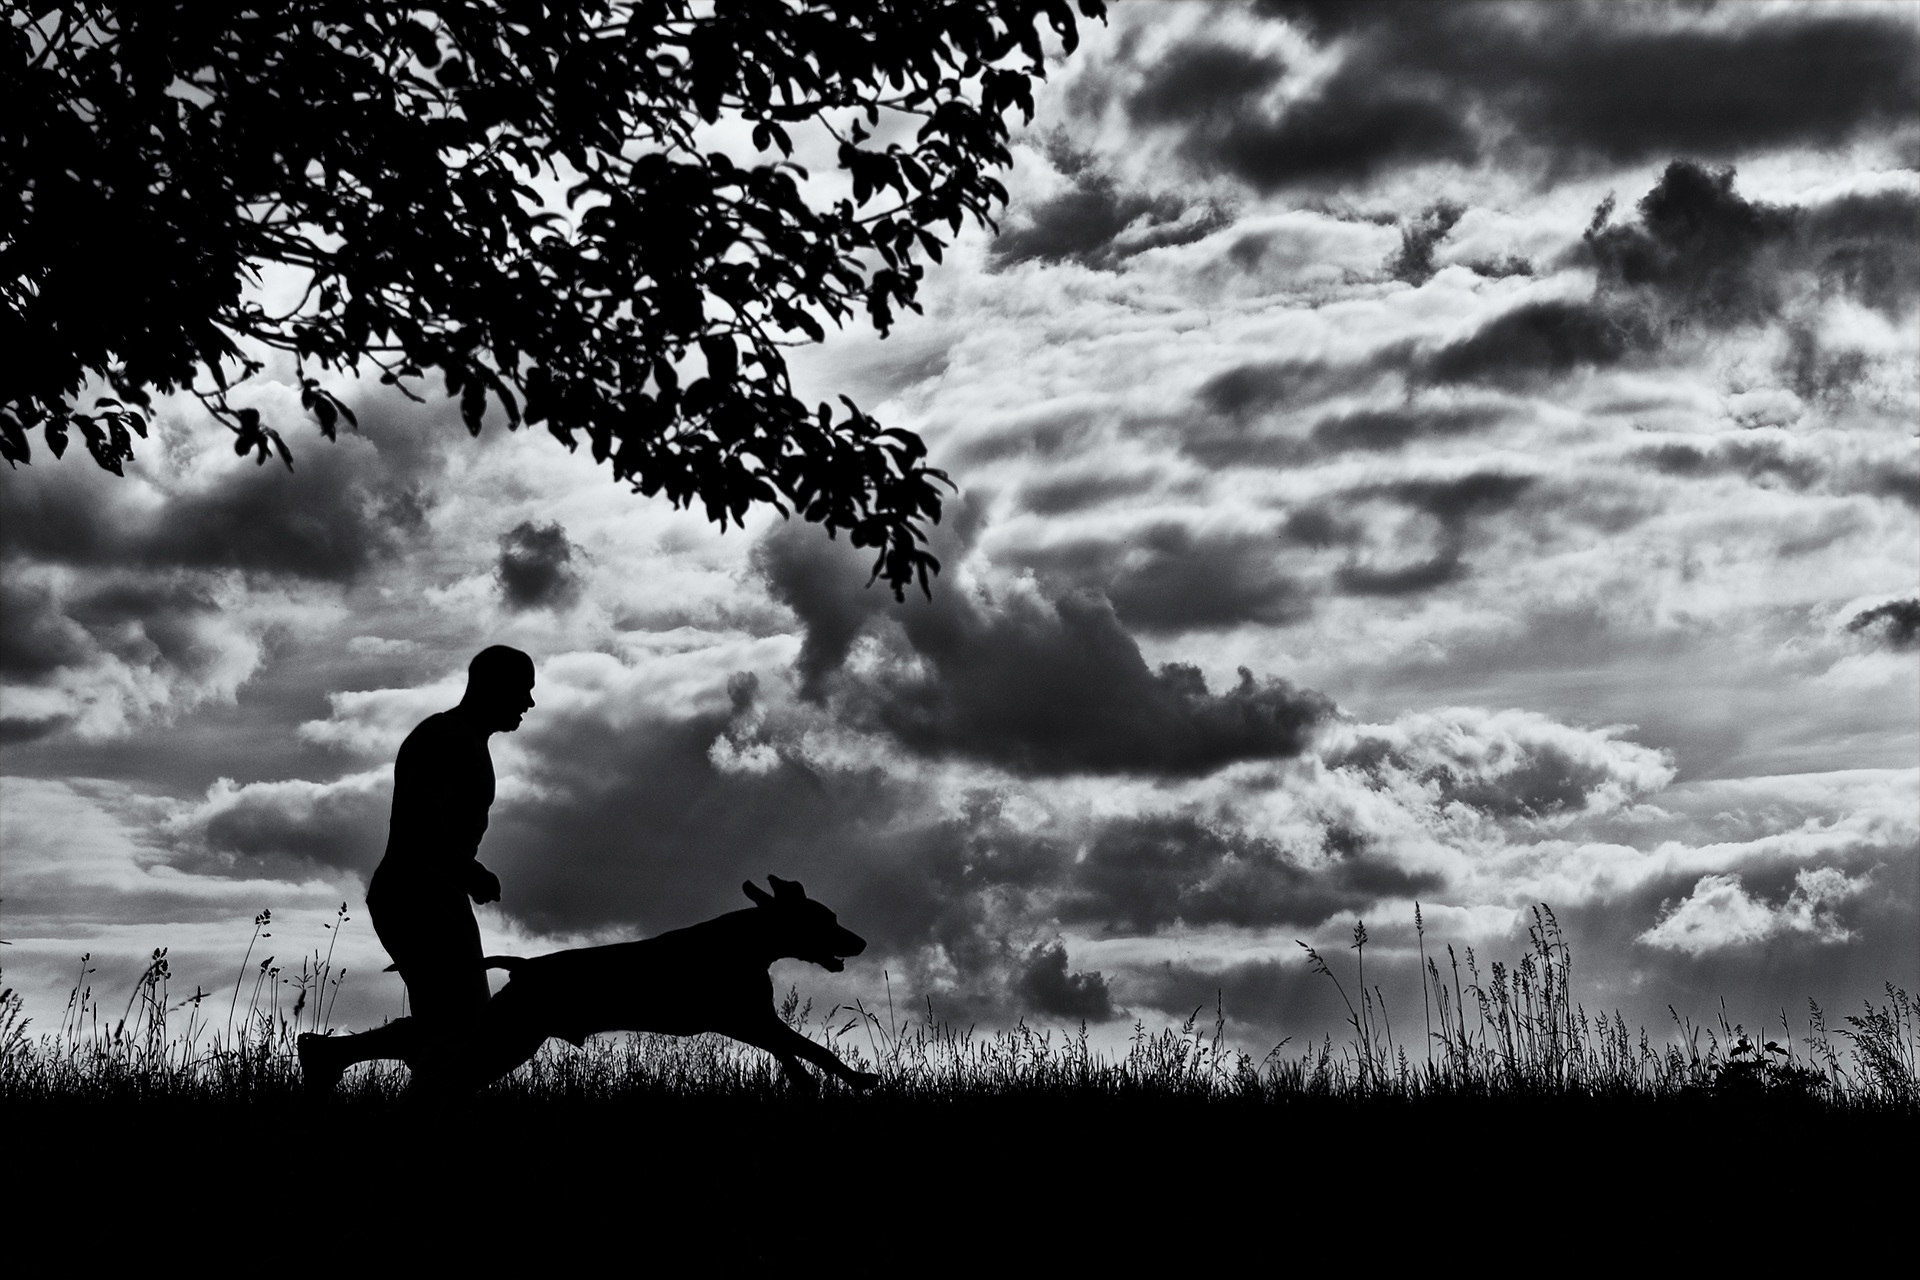 A man running with his dog against a dark sky